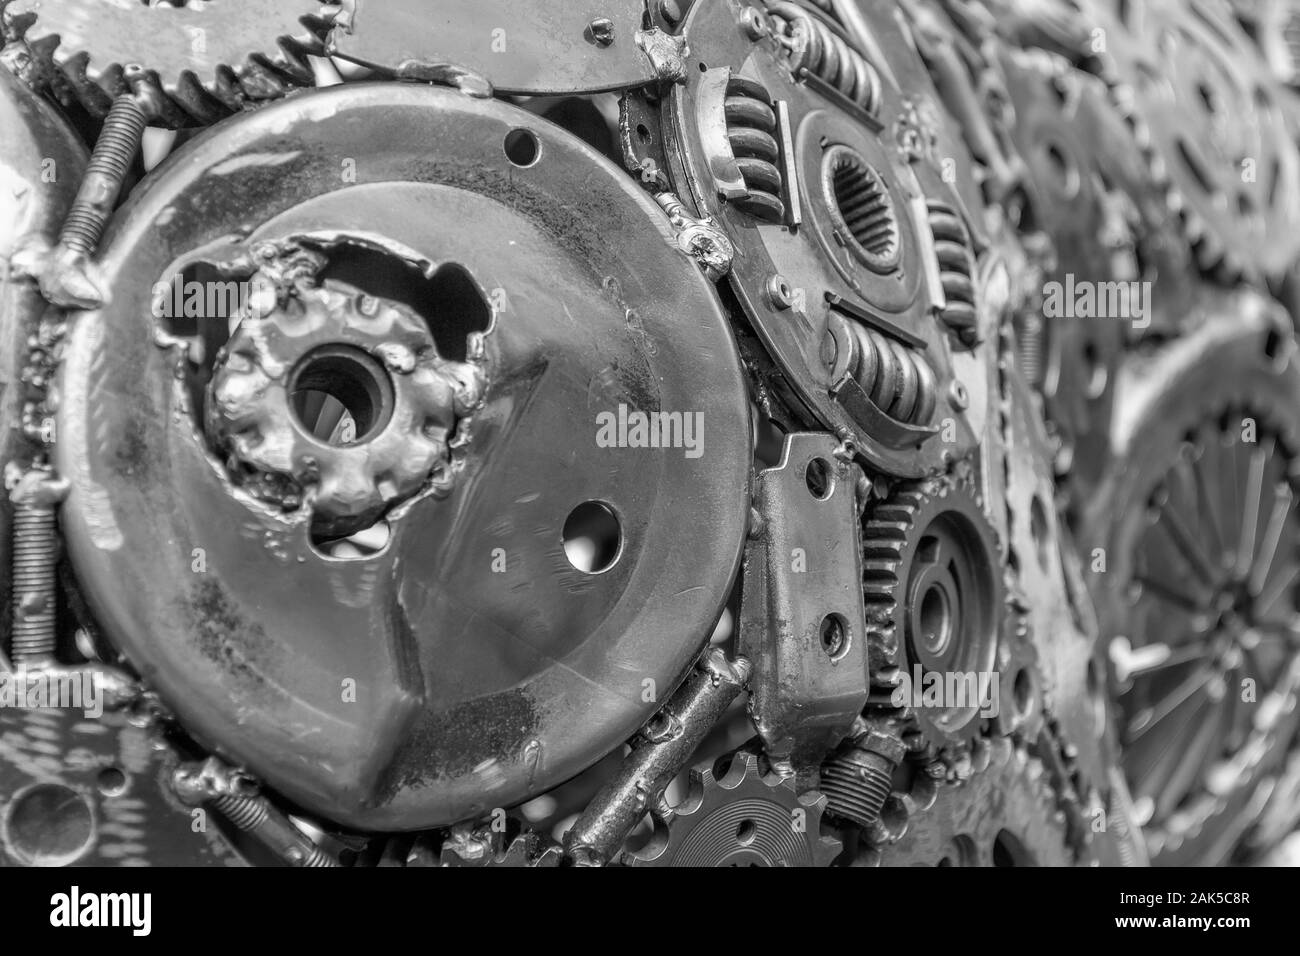 full frame metallic mechanical background with gear wheels and other material Stock Photo